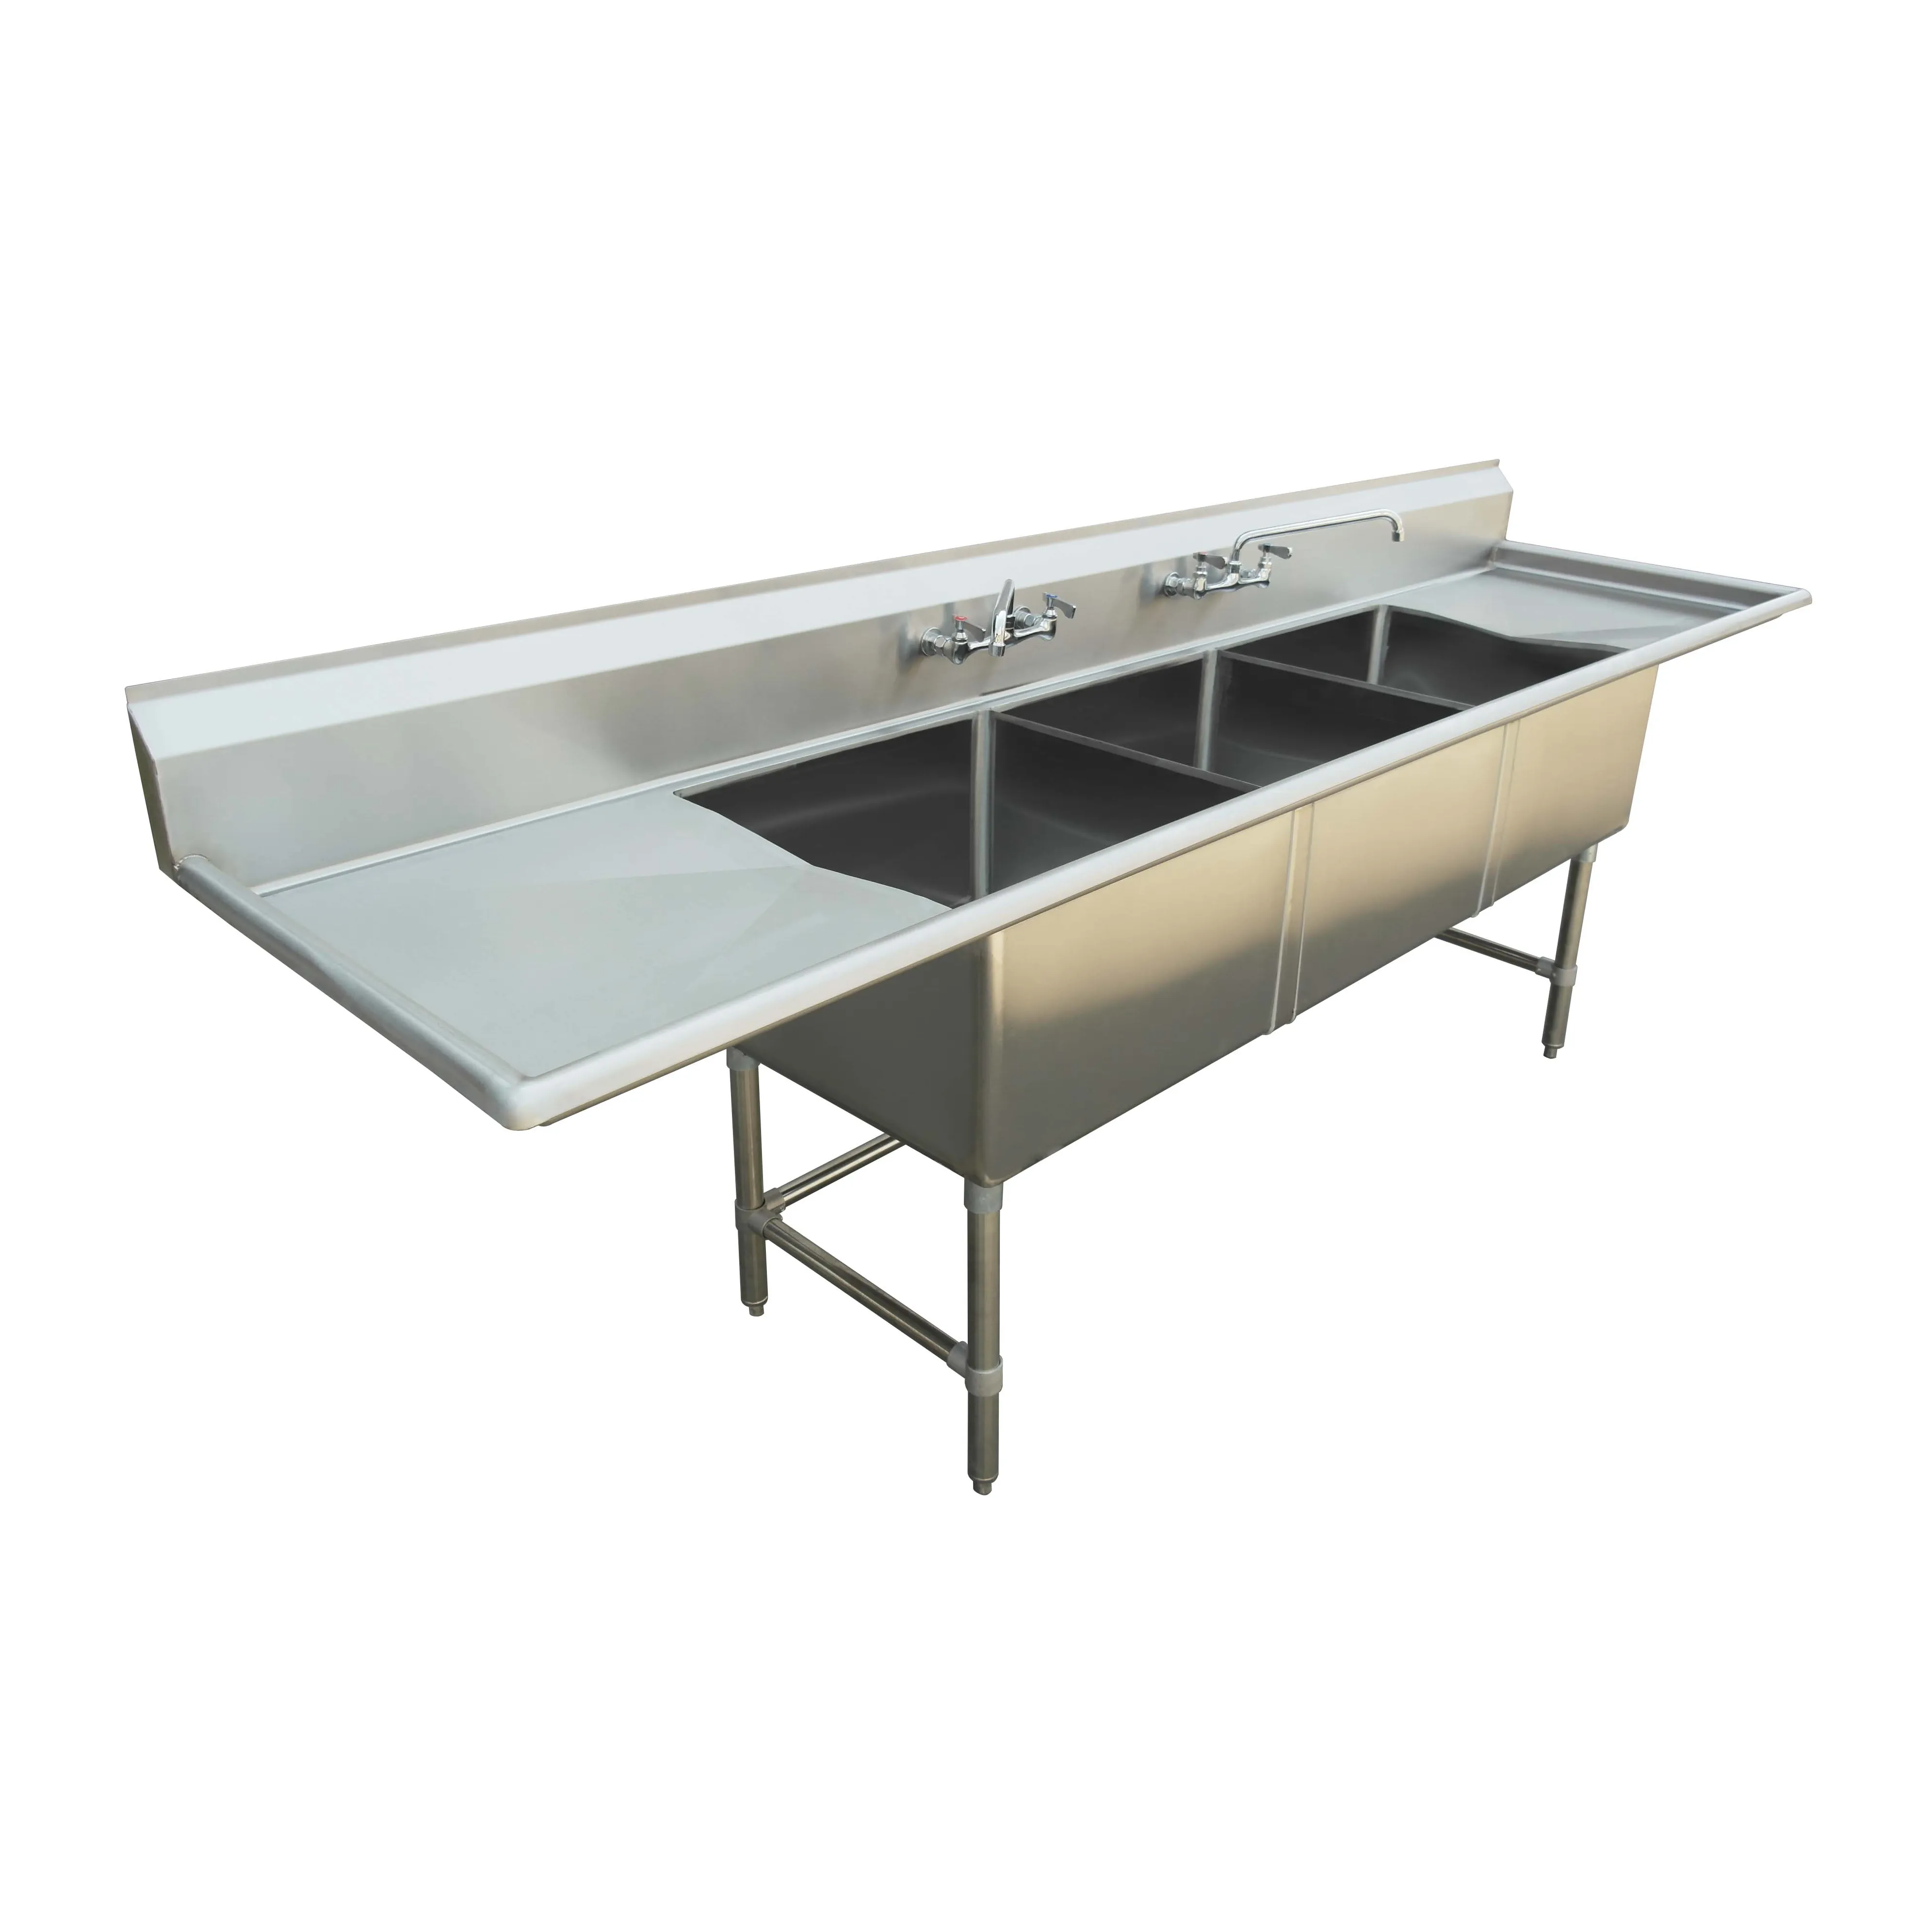 Jincheng Freestanding 304 Stainless Steel Commercial Restaurant Industrial Kitchen 3 Components Three Compartment Sink